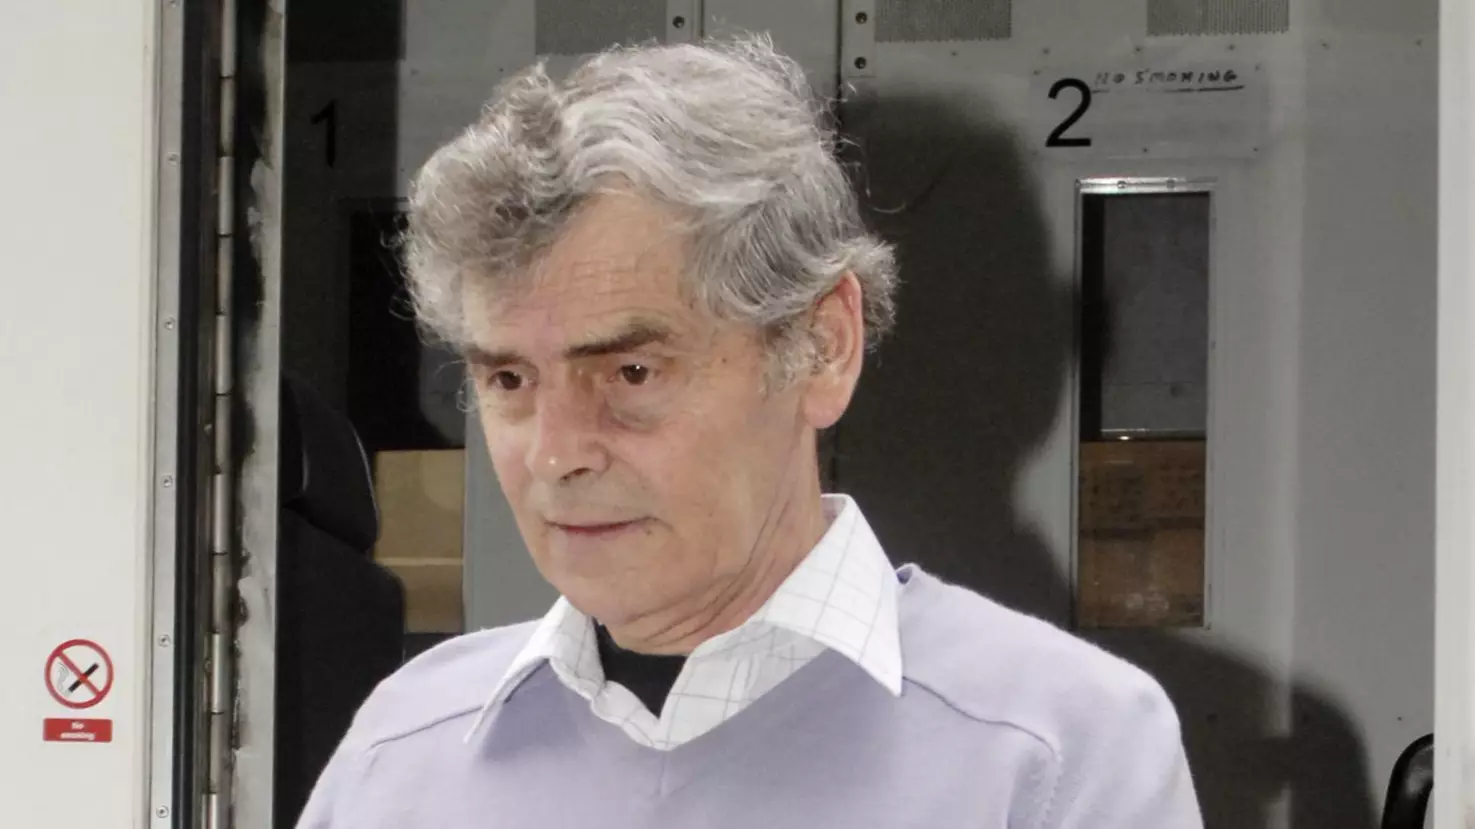 New Crime Documentary Aims To Expose Infamous Serial Killer Peter Tobin Of More Murders